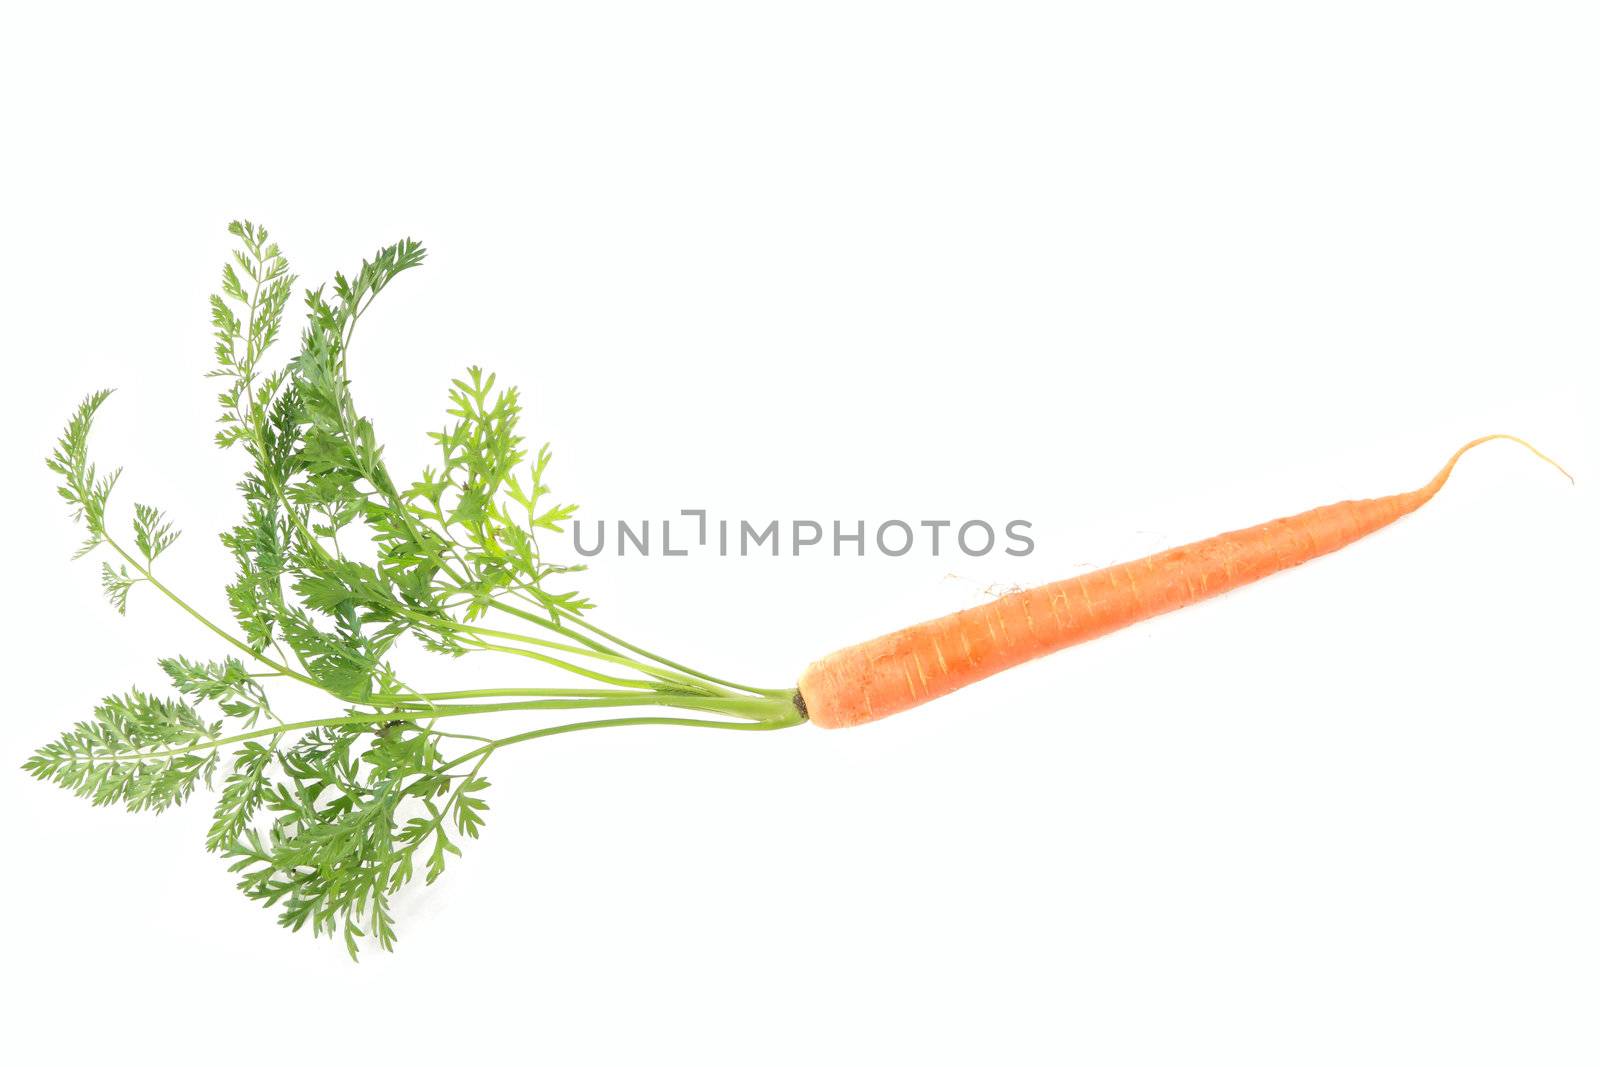 Fresch carrot isolated on white background